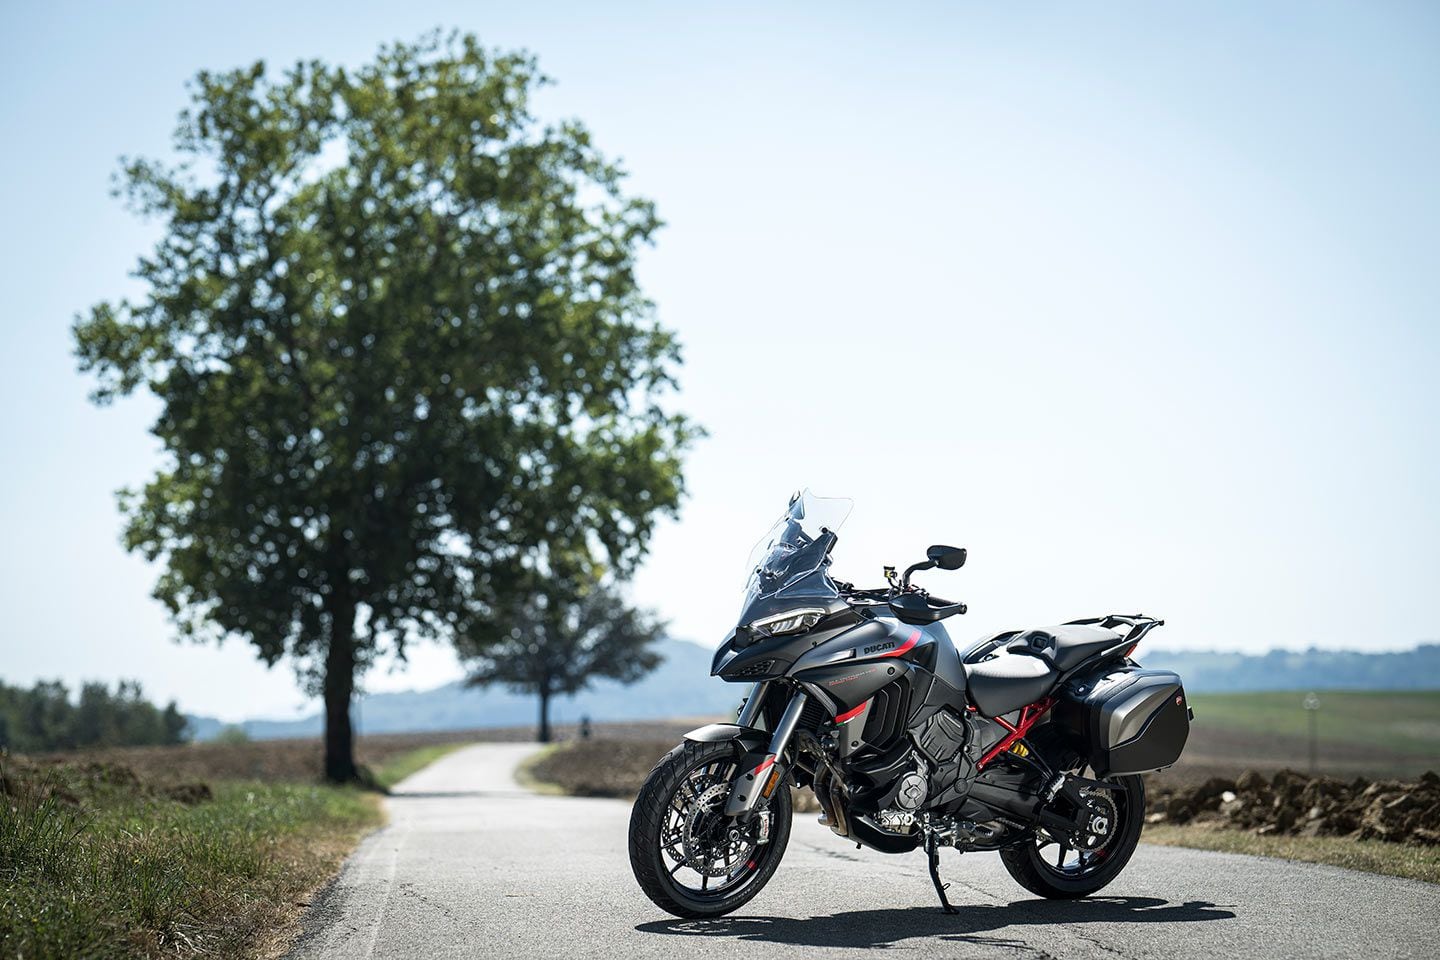 Priced at $28,395, the Multistrada V4 S Grand Tour offers a great value.